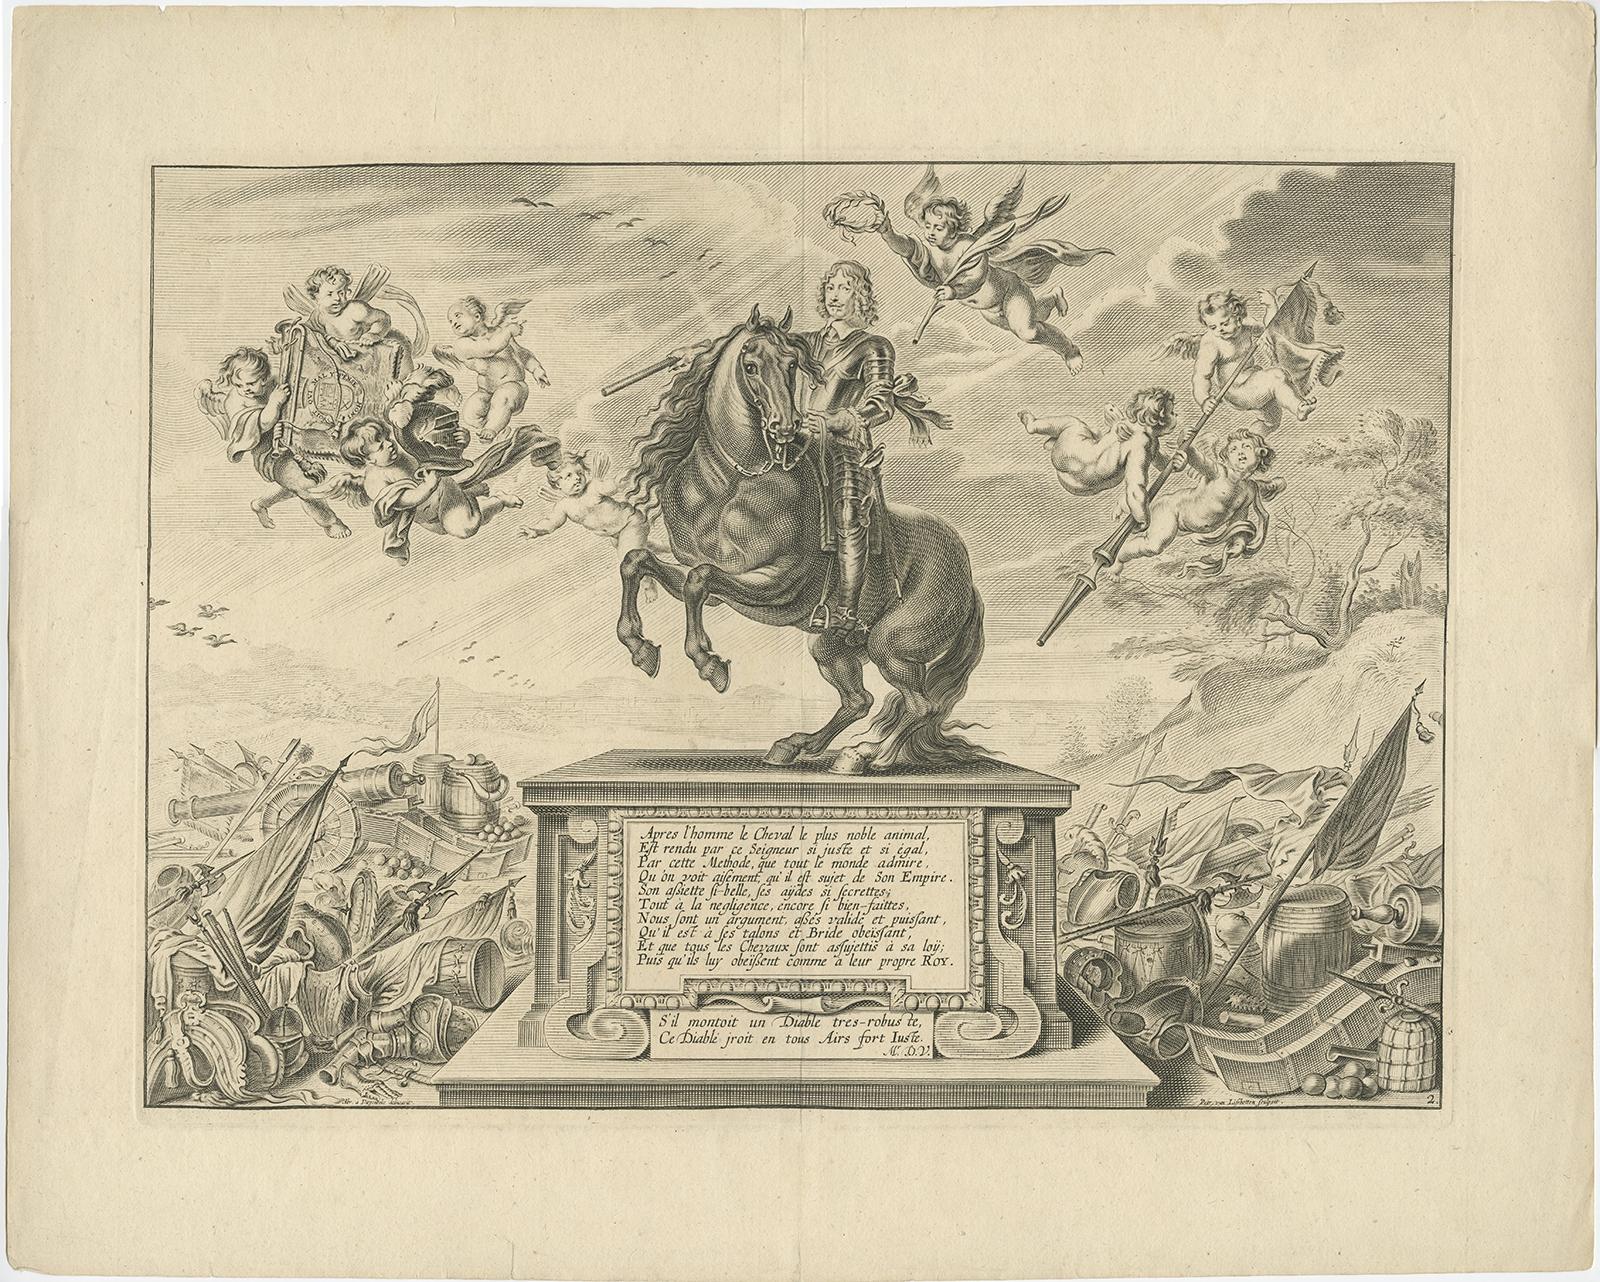 Antique print titled 'Apres l'homme le Cheval (..)'. 

Antique print depicting William Cavendish, first Duke of Newcastle, on horseback on an inscribed pedestal at centre. This print originates from 'A New Method and Extraordinary Invention to